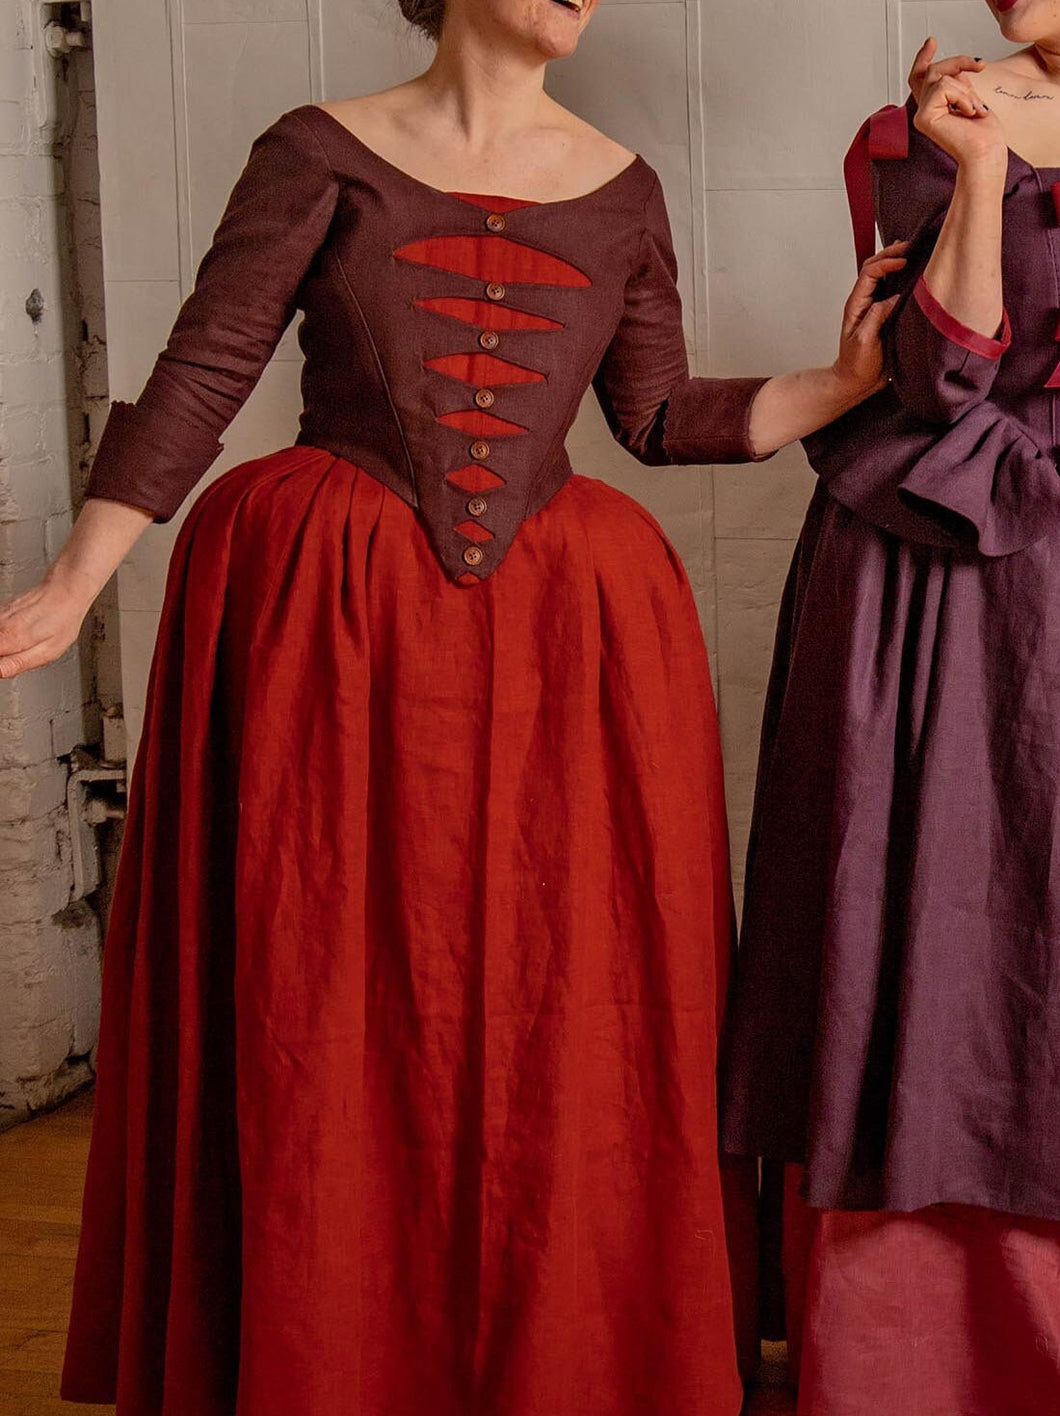 18th century button front bodice with contrasting skirt